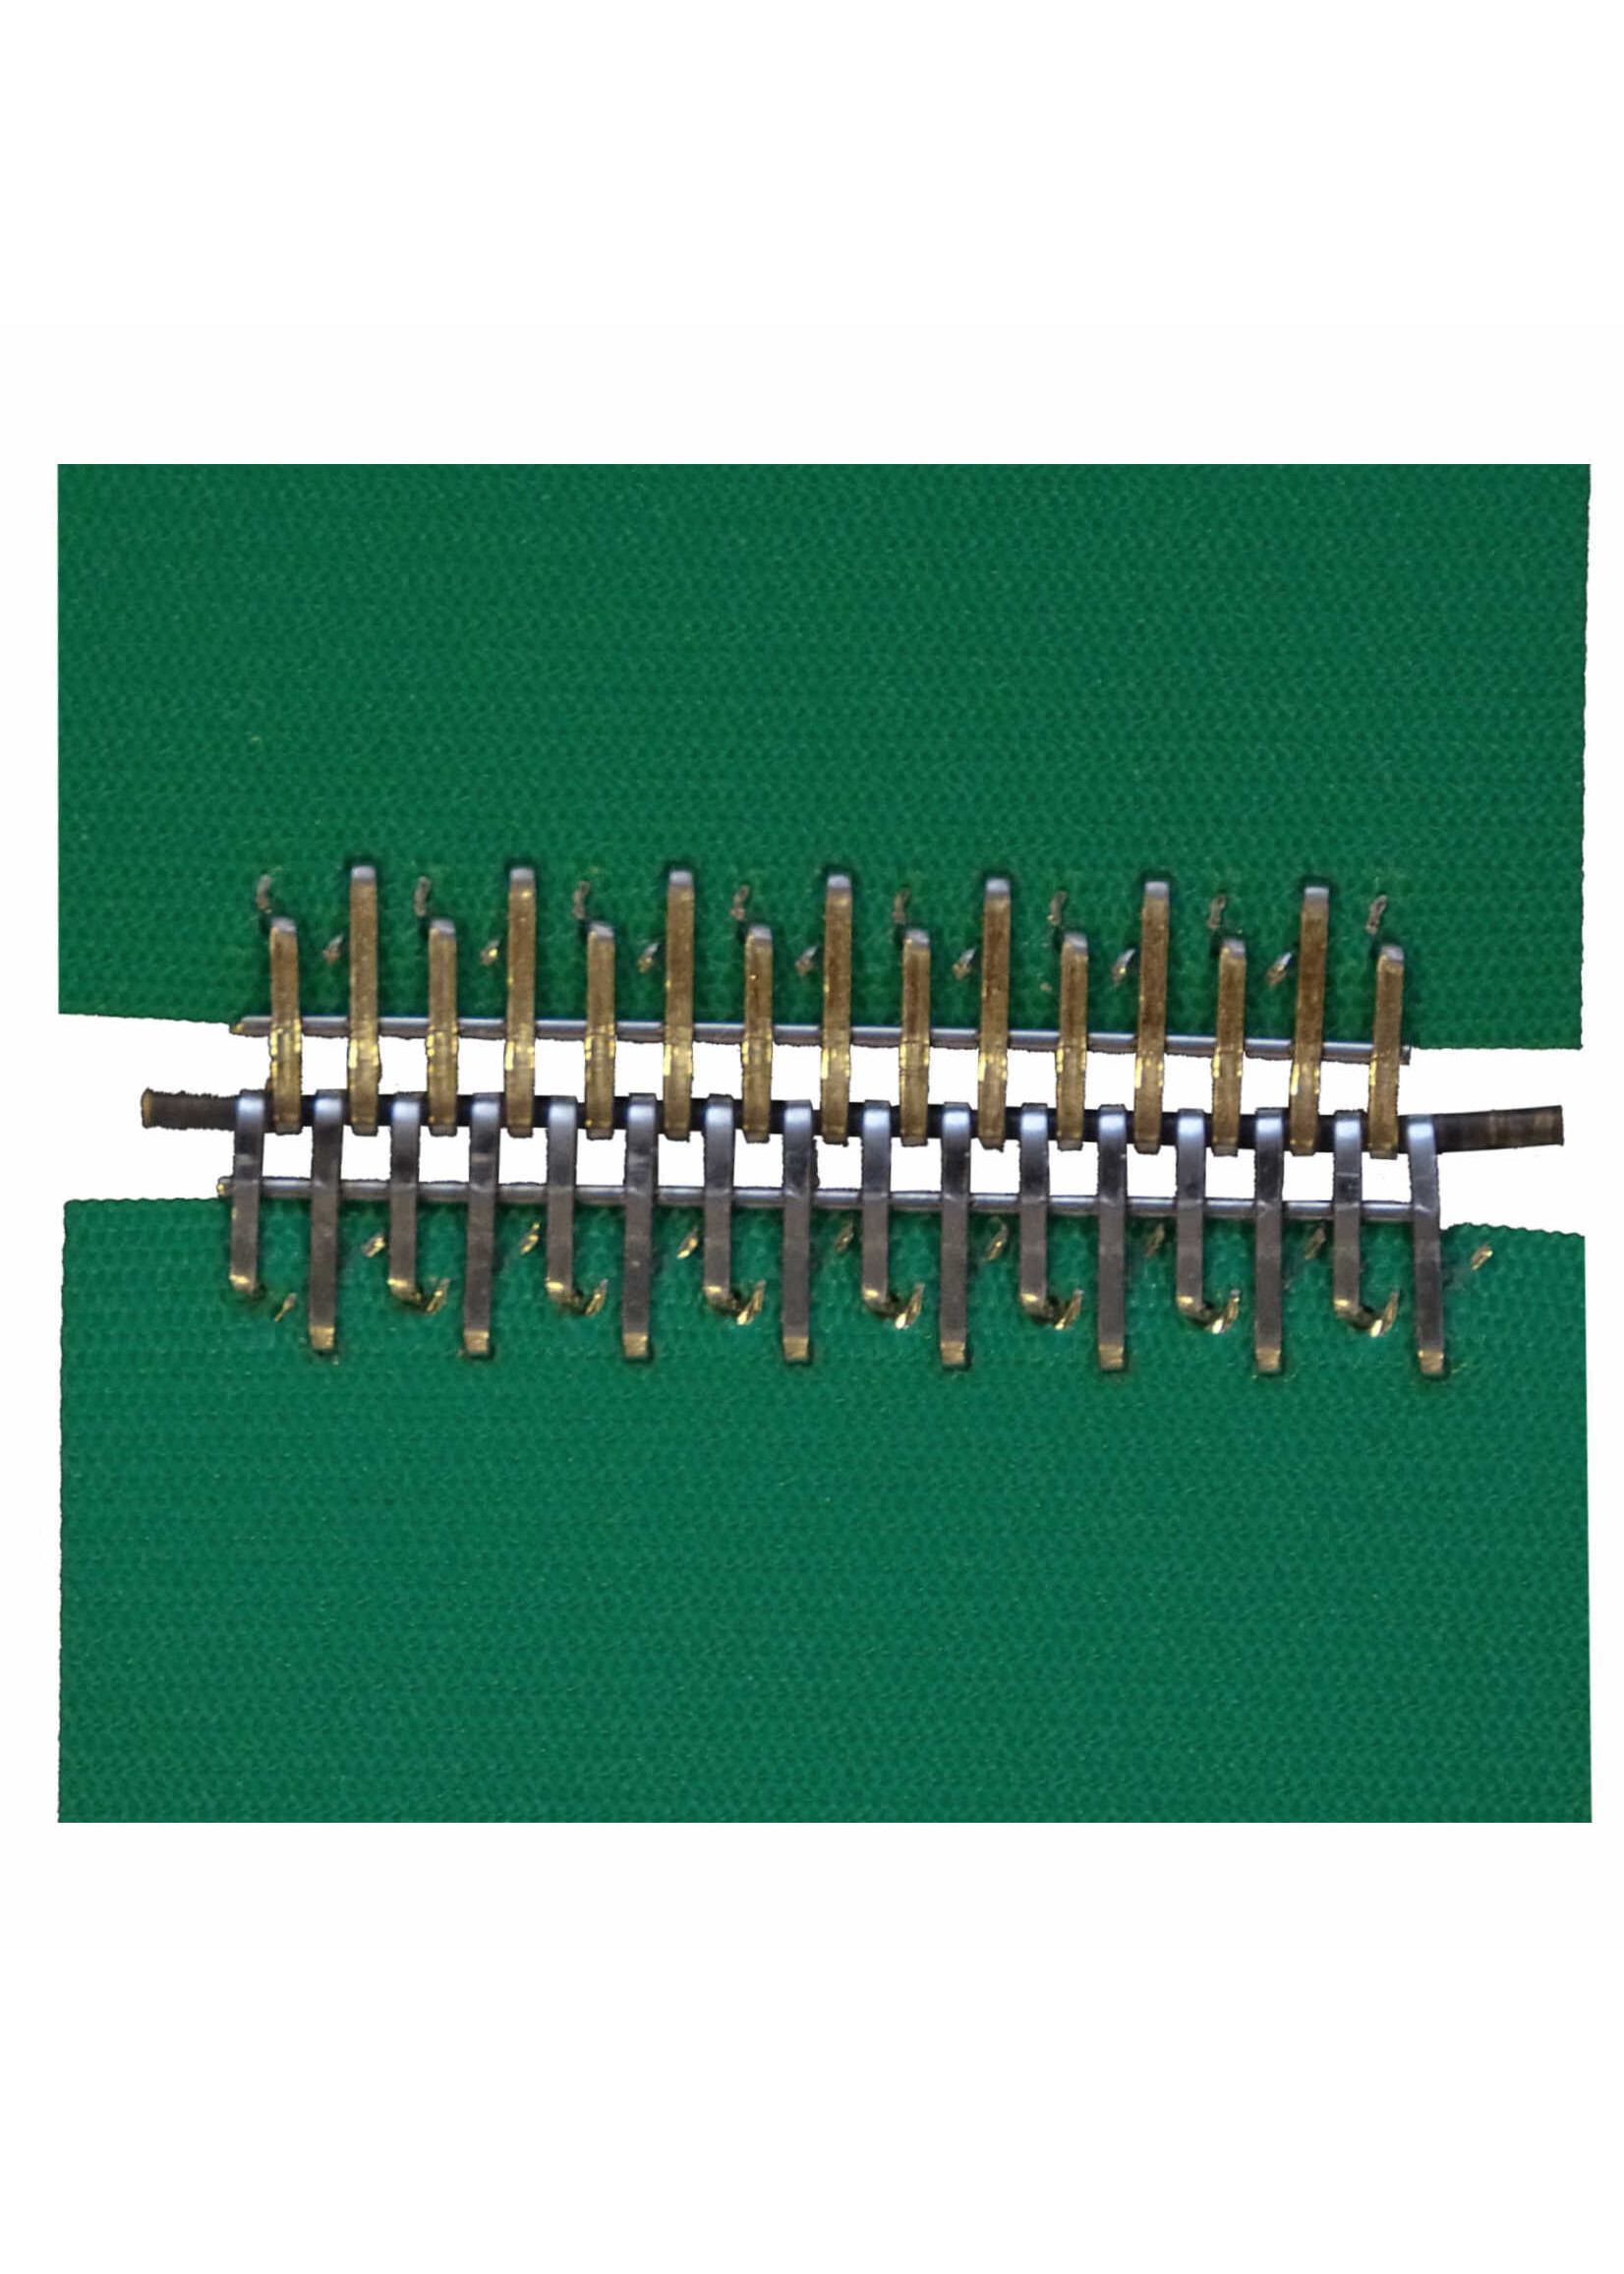 Solana Connectors for belts 0 - 2,0 mm thick